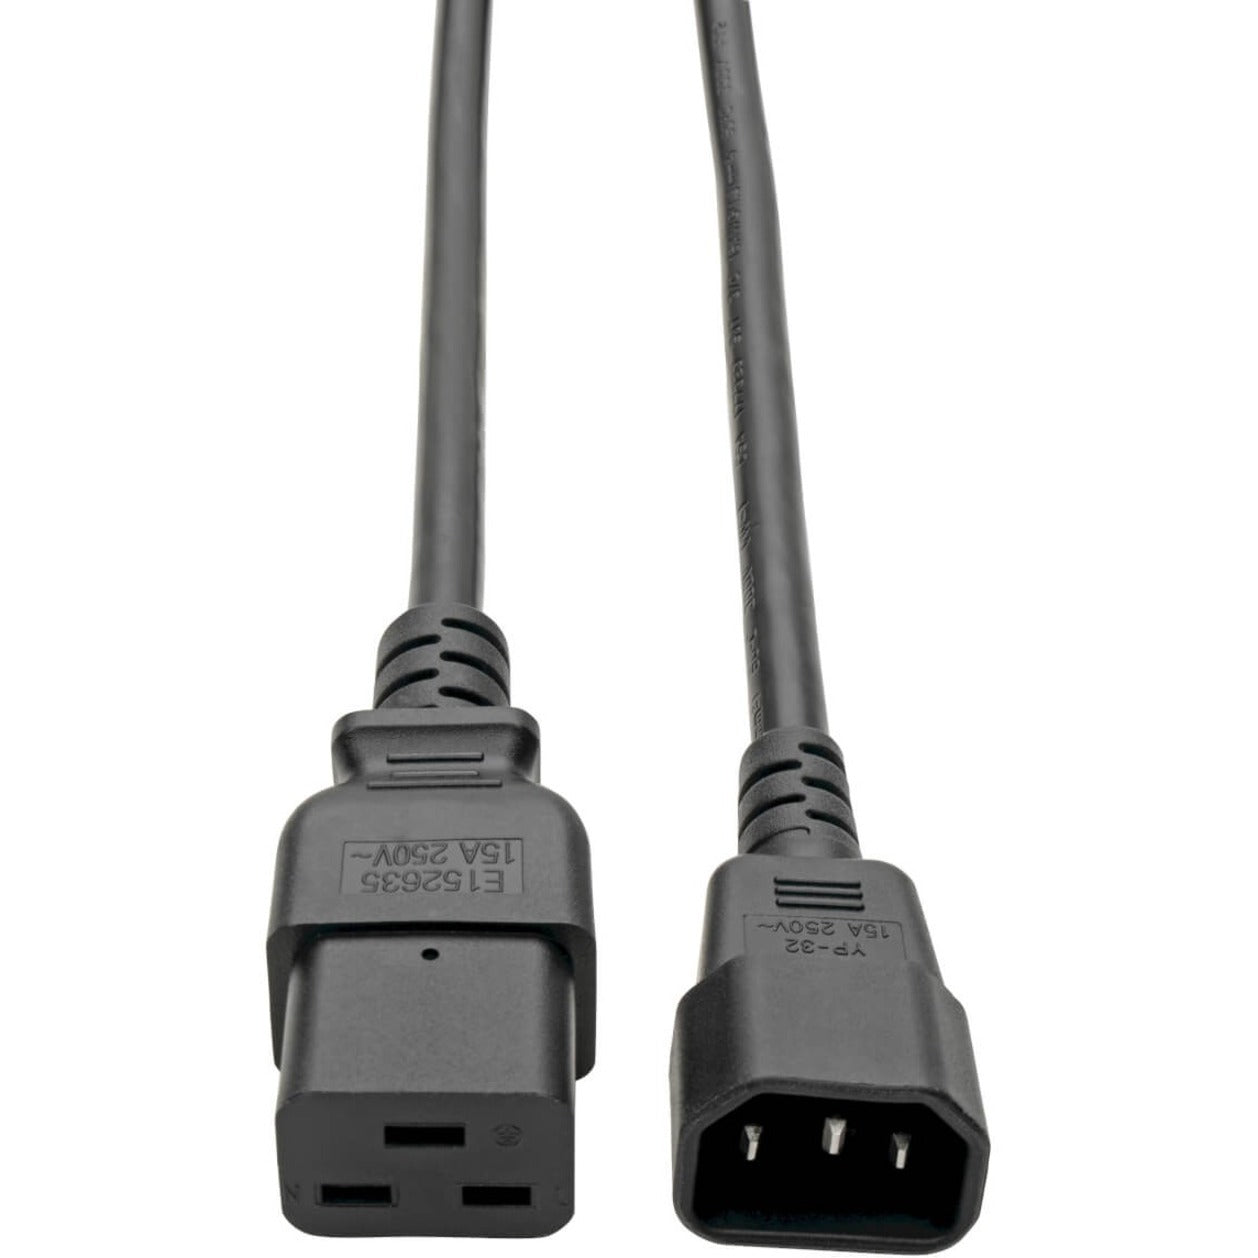 Tripp Lite P047-010 Power Interconnect Cable, 10 ft, 15A 250V AC